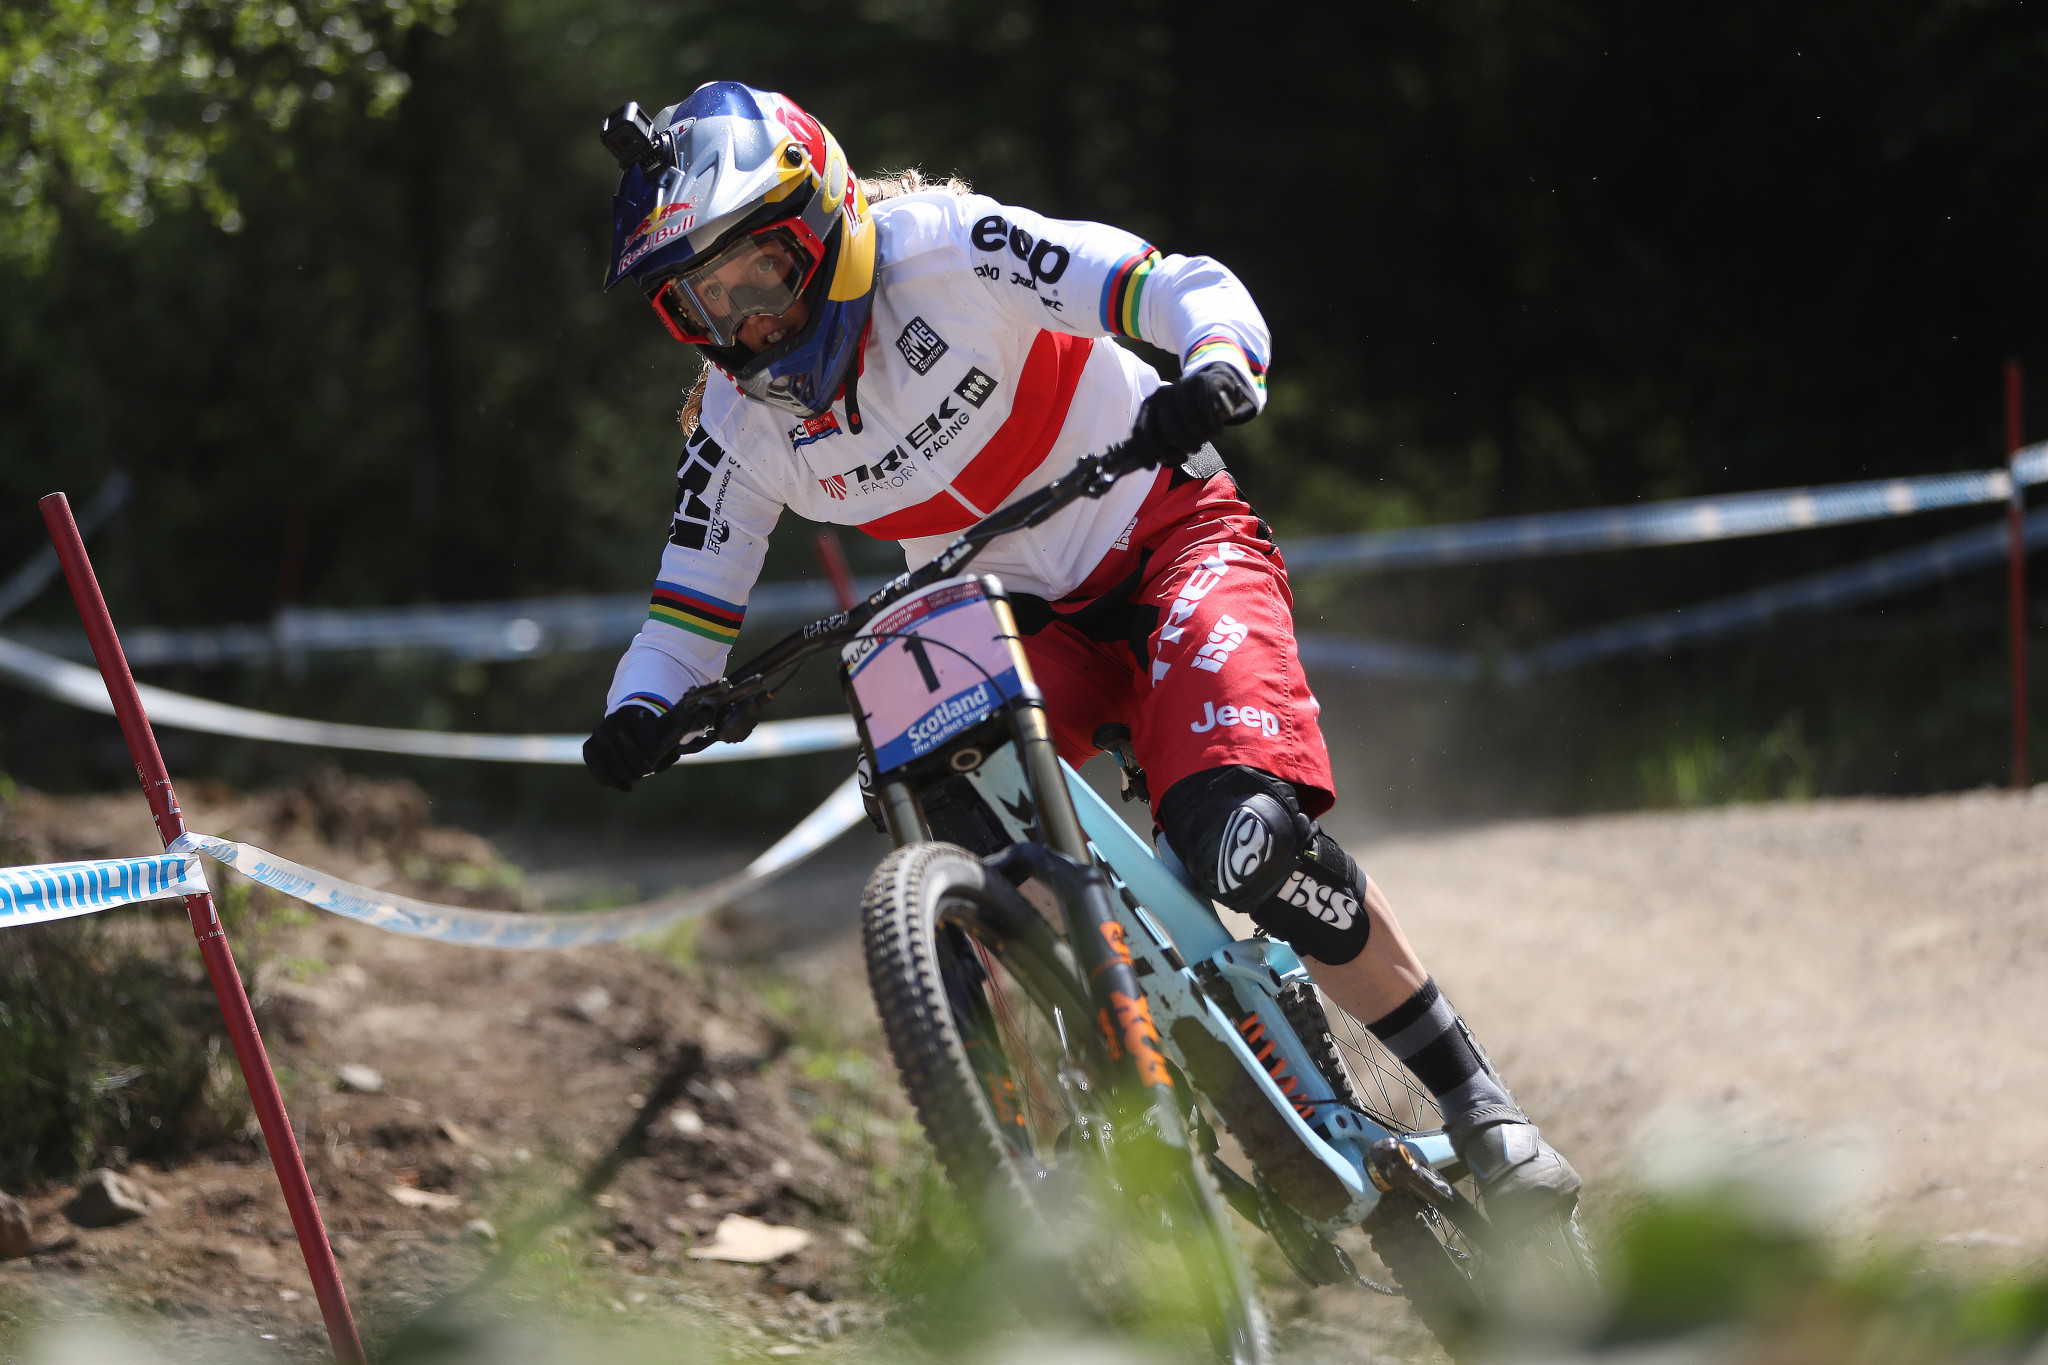 Home hopes high at UCI Downhill Mountain Bike World Cup in Fort William